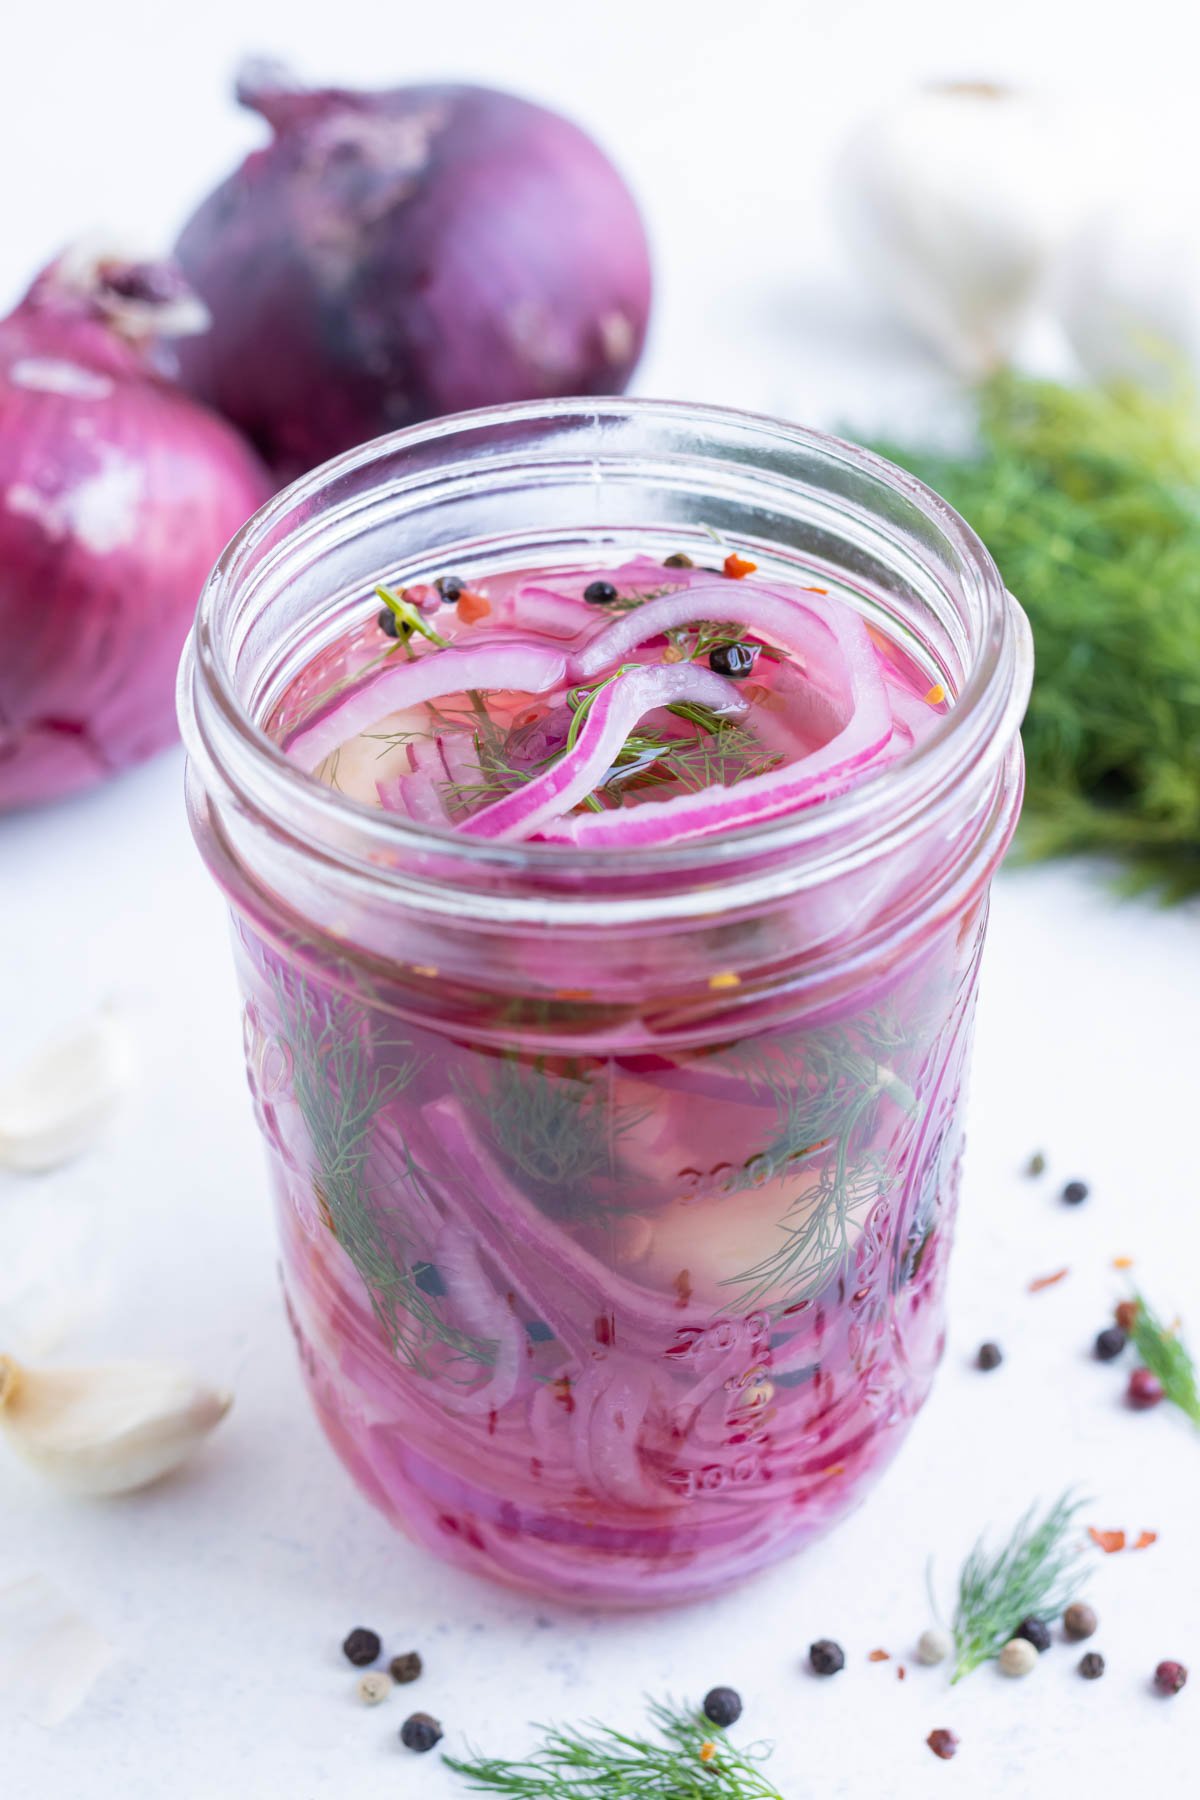 A glass jar with sliced onion, spices, and brining solution.